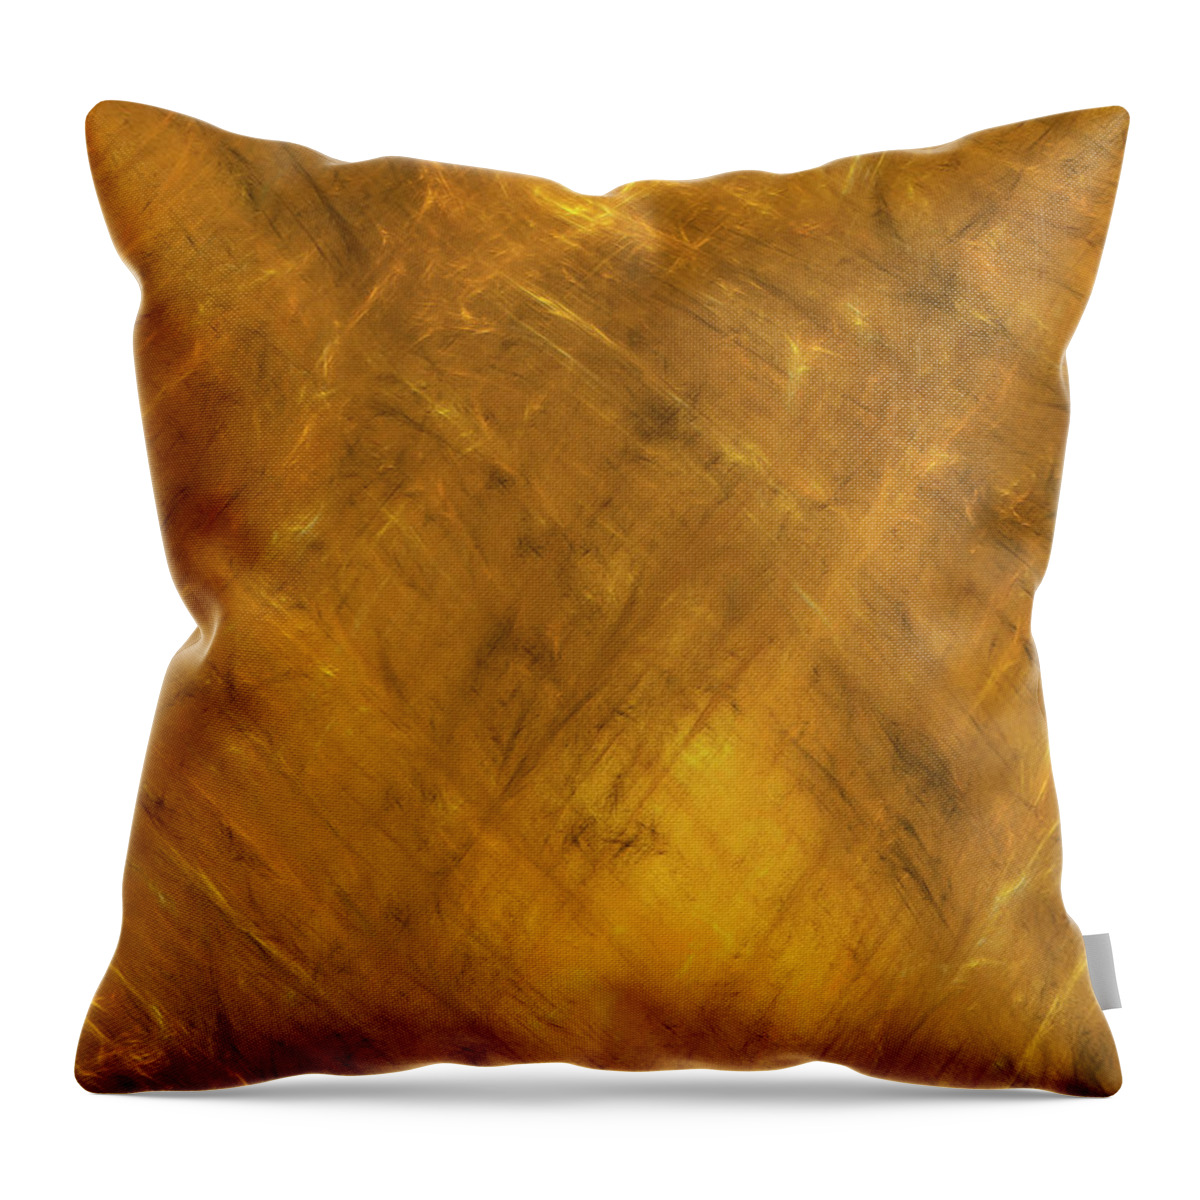 Abstract Throw Pillow featuring the digital art Andee Design Abstract 128 2017 by Andee Design